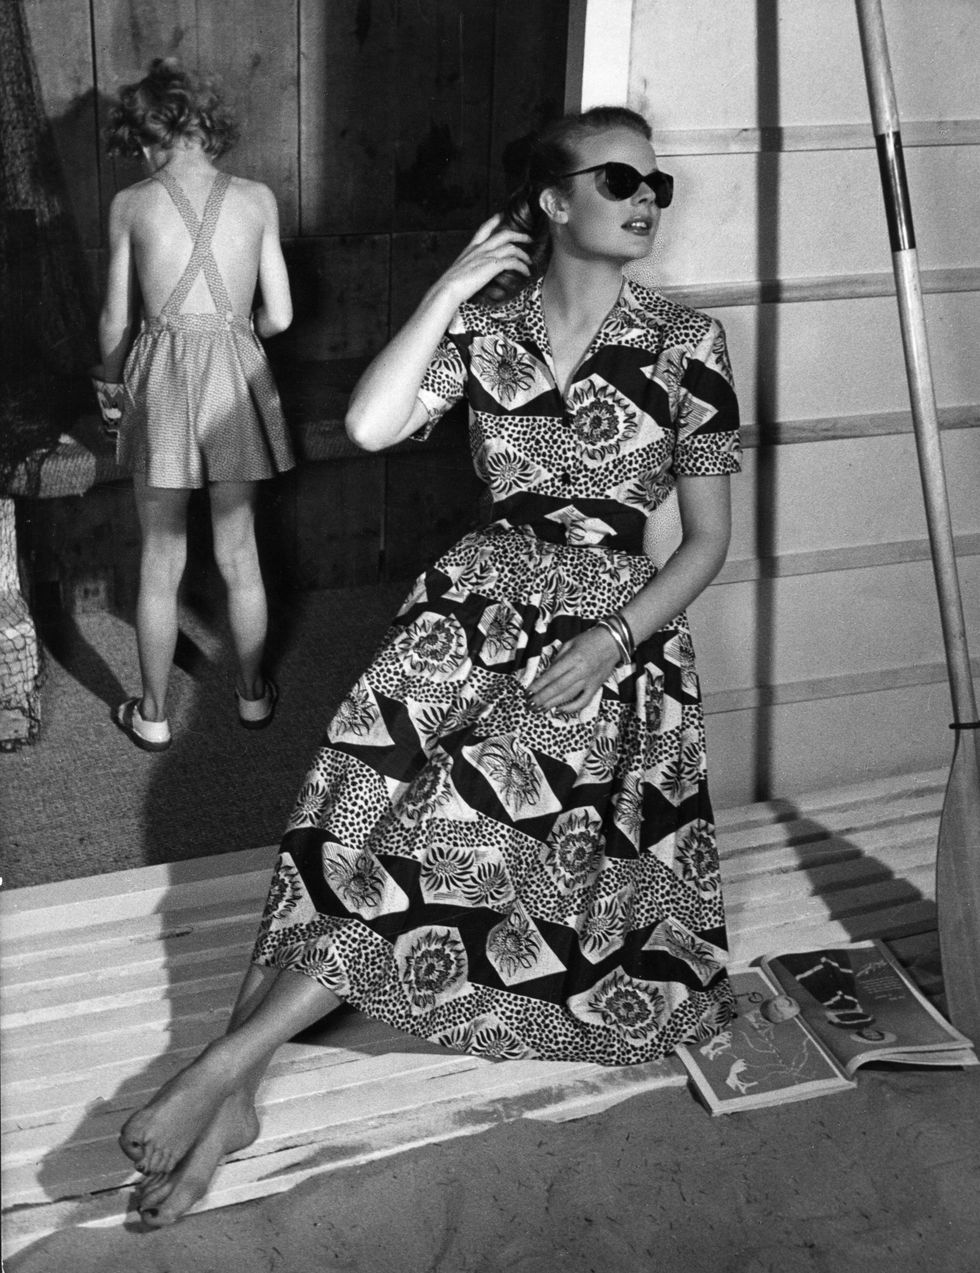 1950s Fashion Photos and Trends - Fashion Trends from the '50s